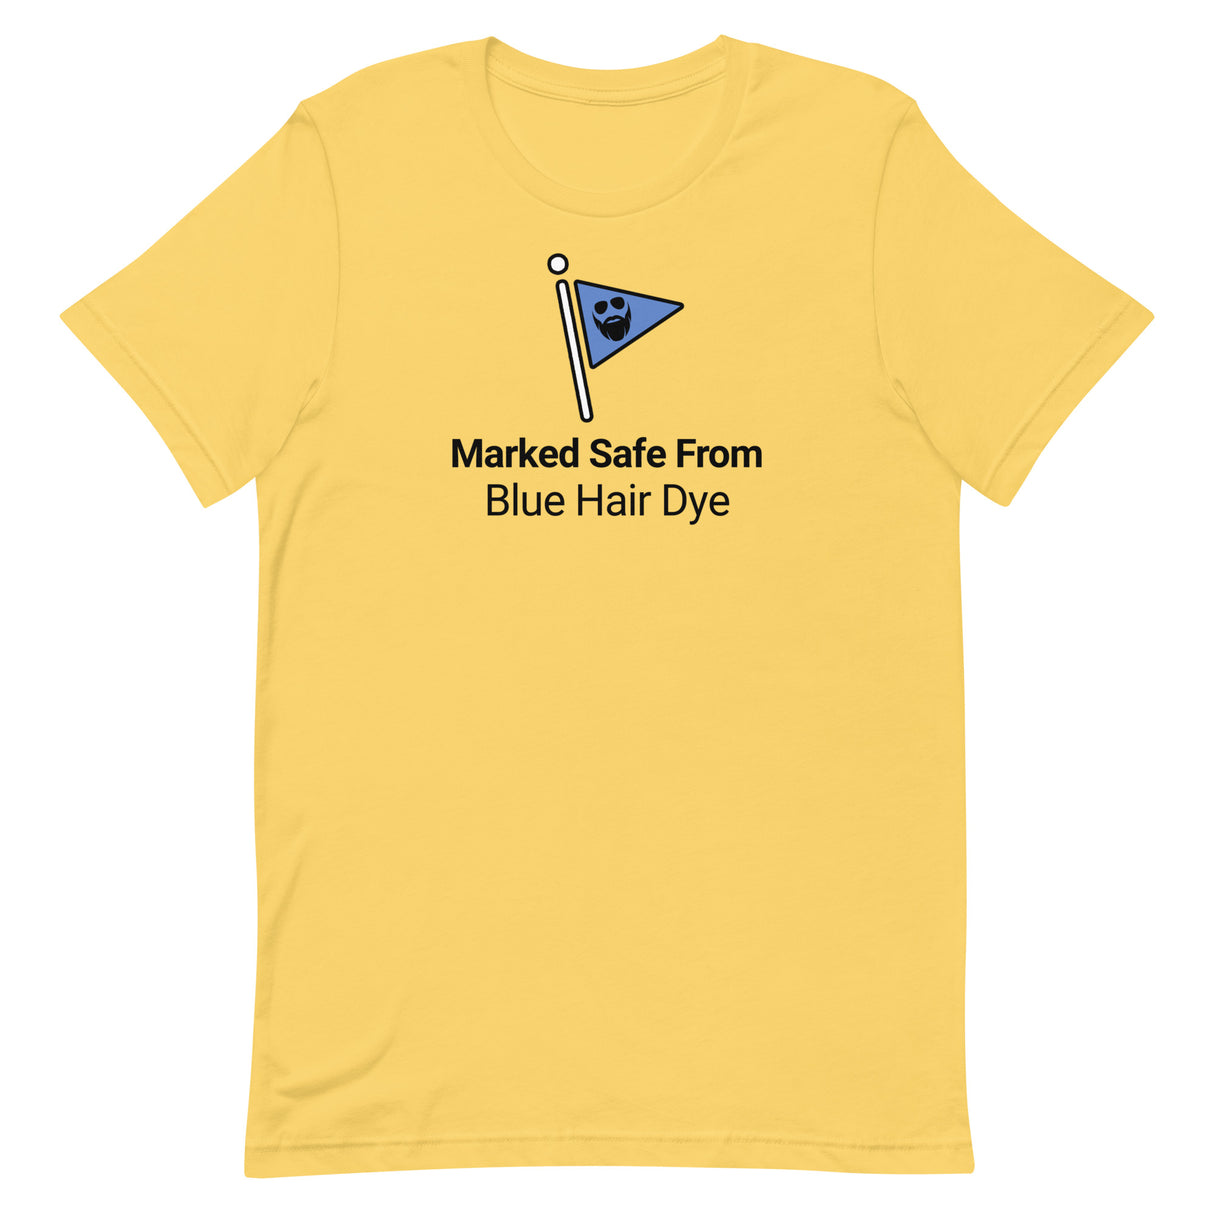 Marked Safe From Blue Hair Dye T-Shirt